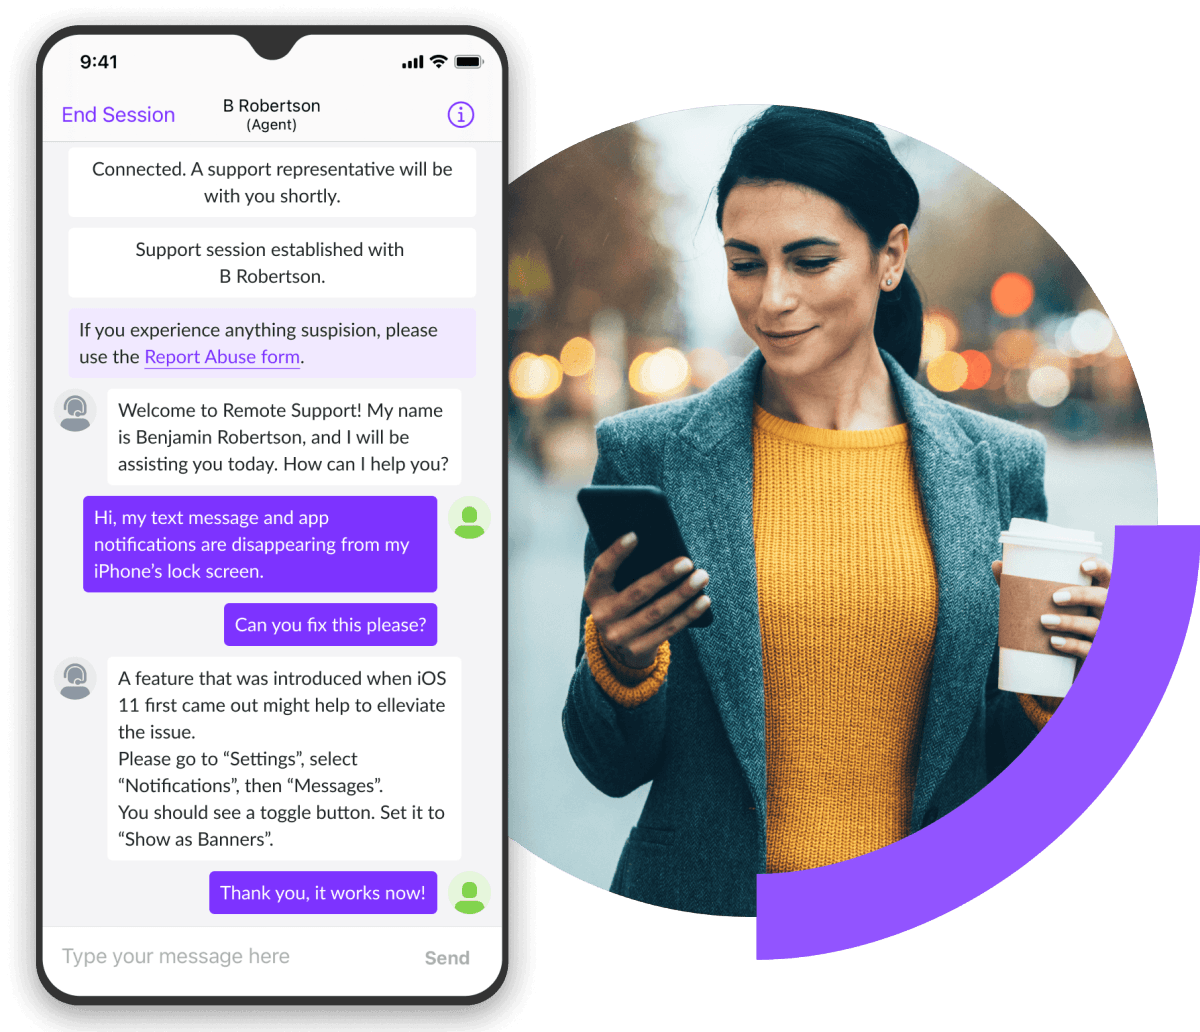 Remote support chat session showcased in mobile phone with companion image of an on-the-go woman walking and looking at mobile phone